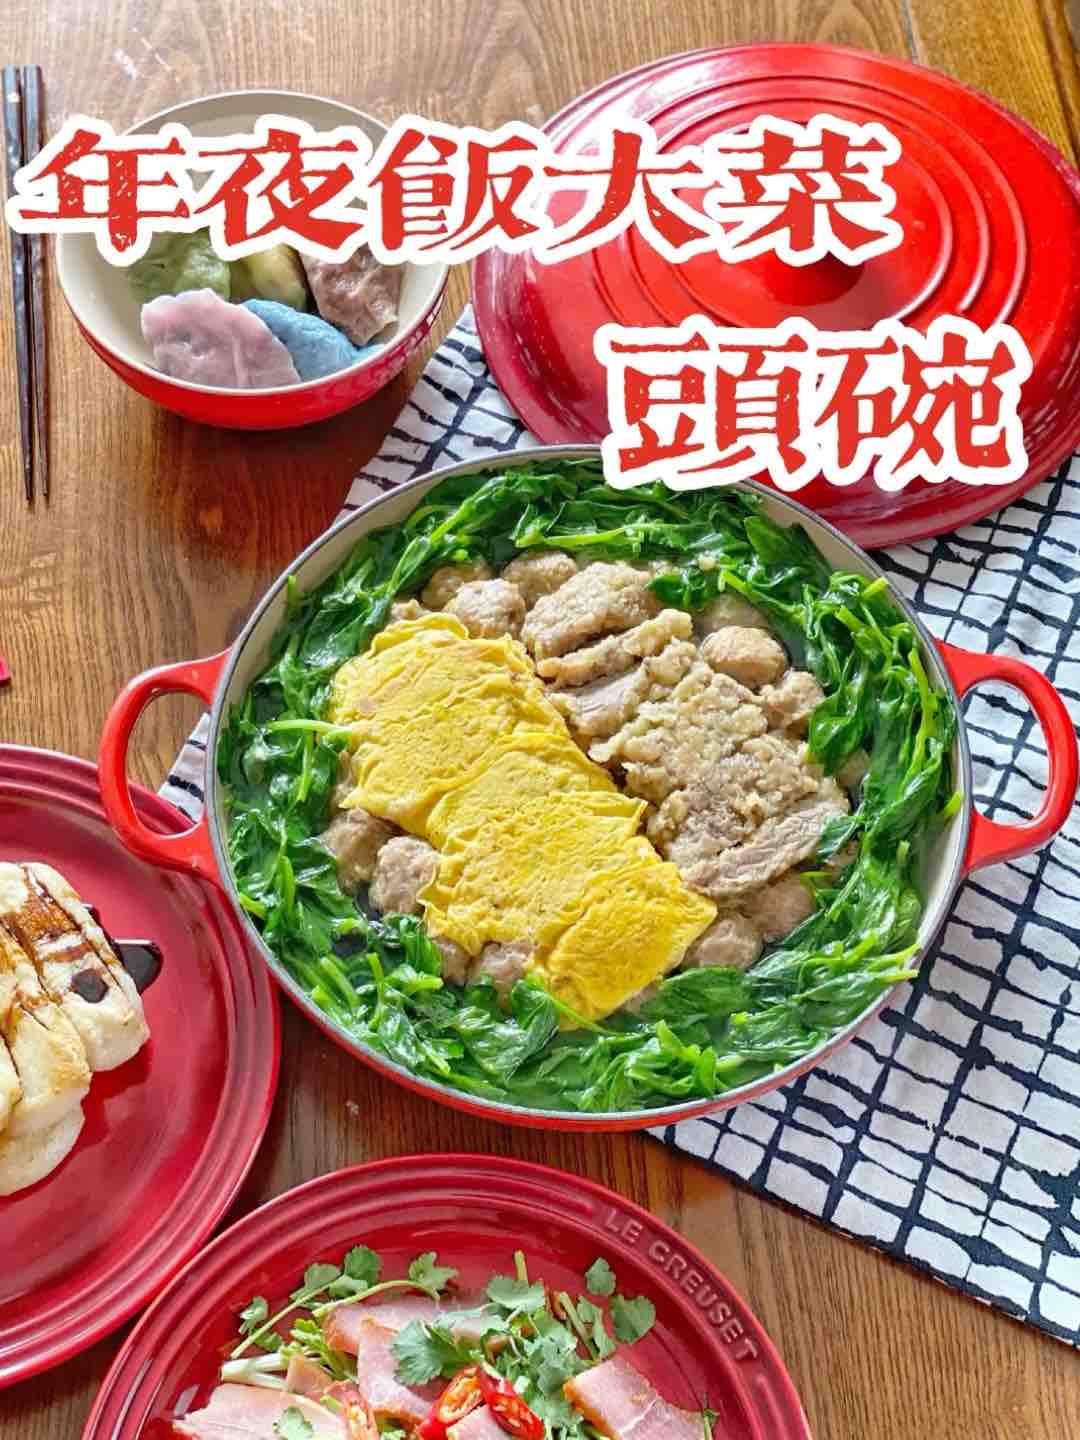 Super Favorite First Bowl, You Can Also Make Big Dishes During Chinese New Year